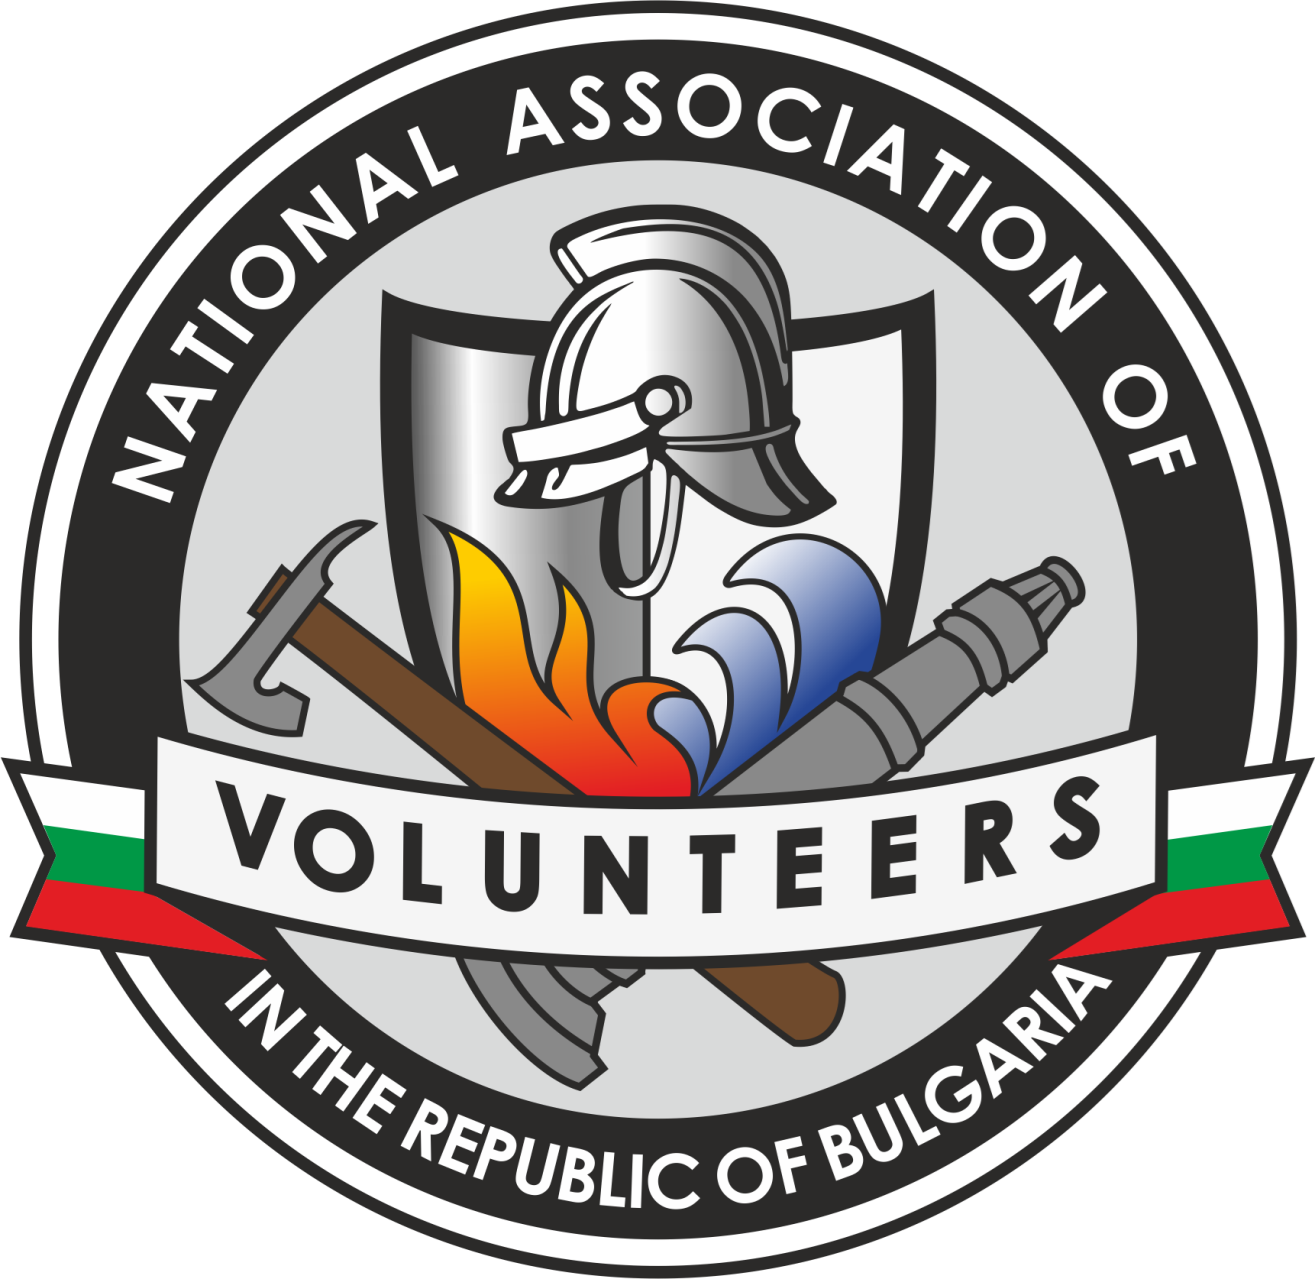 National Association of Volunteers in the Republic of Bulgarian (NAVRB)